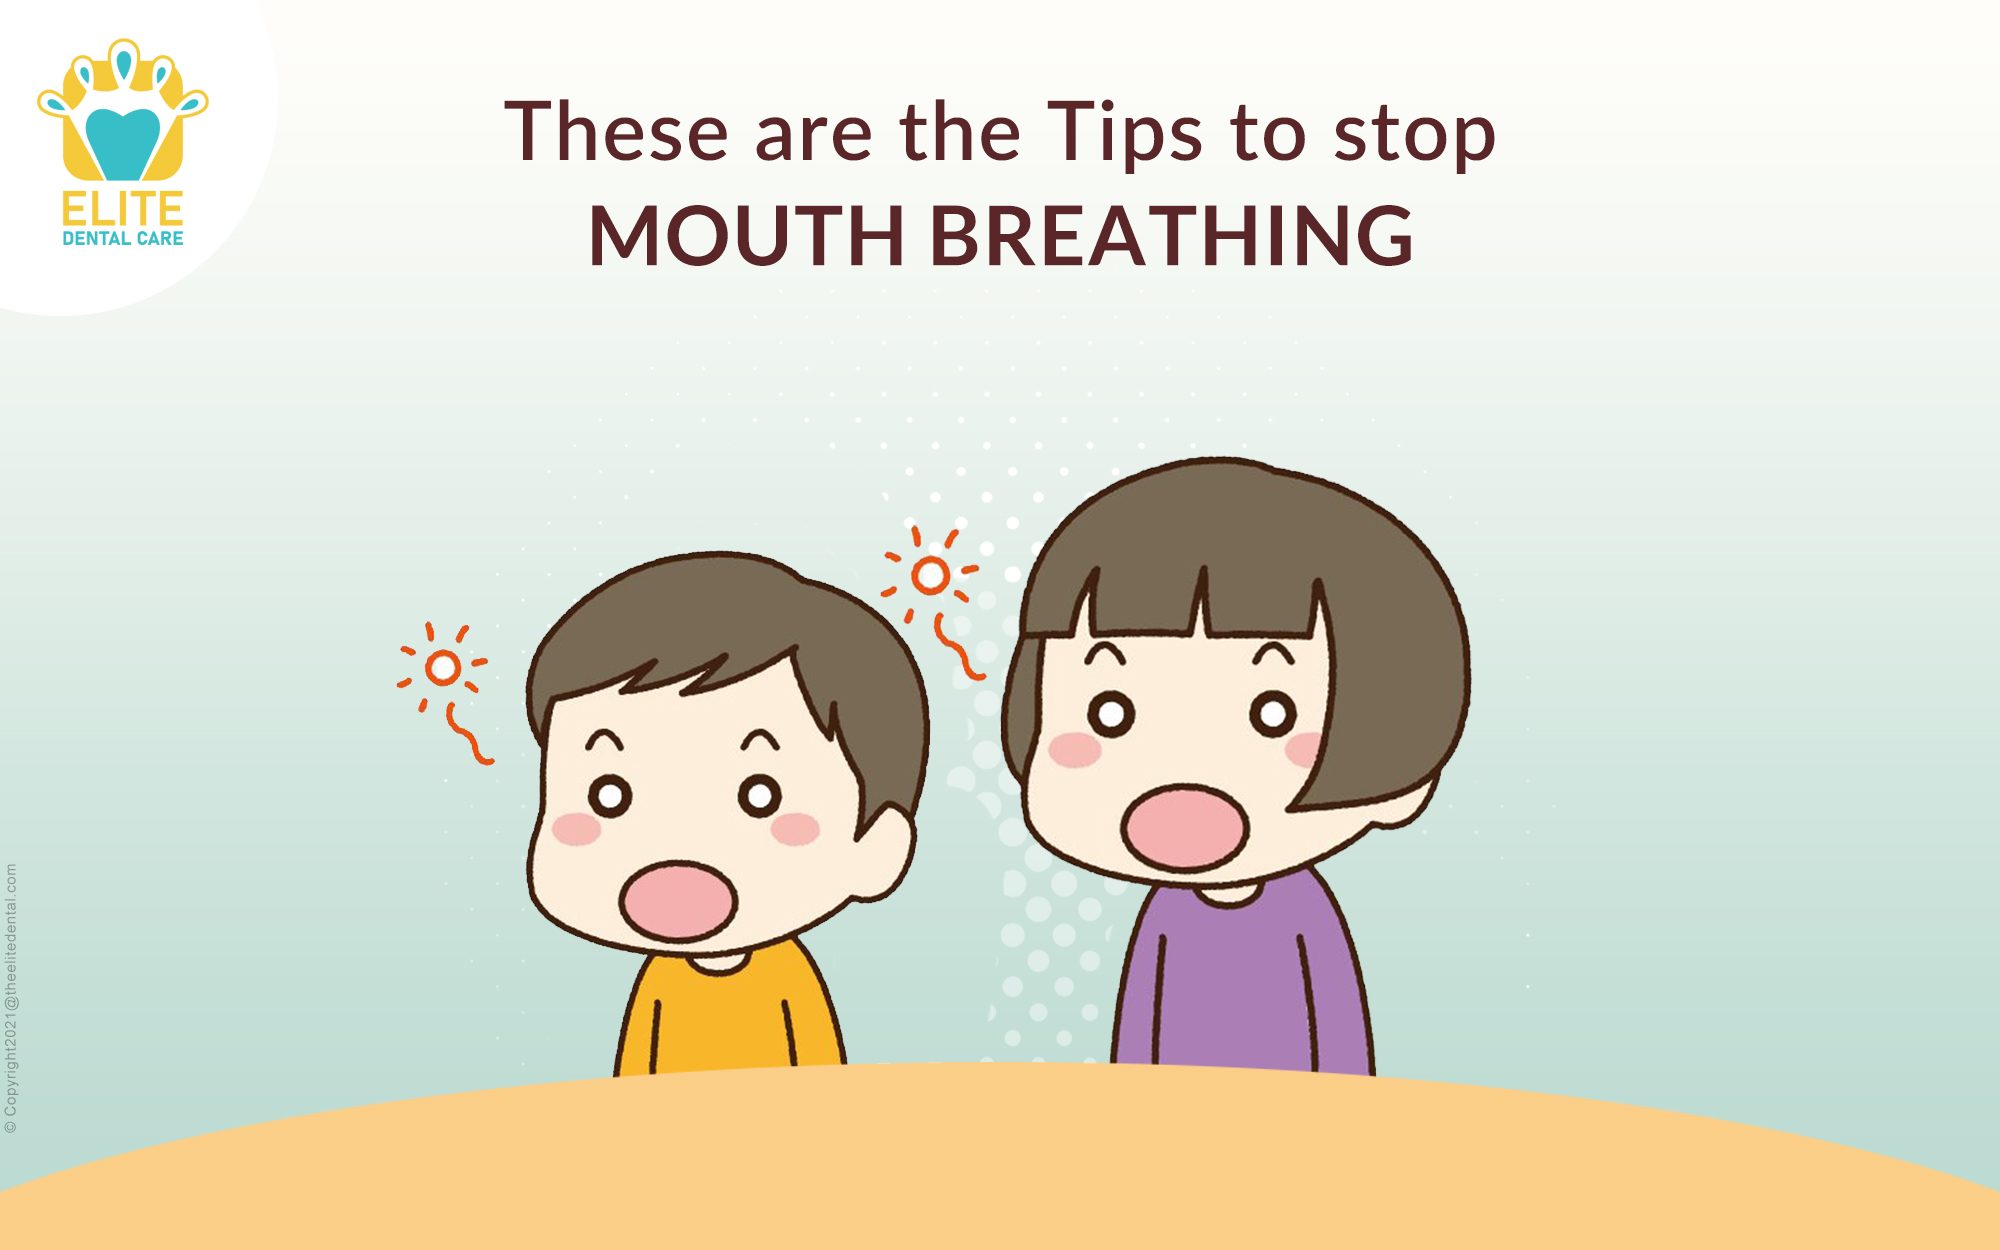 These are the tips to stop Mouth Breathing